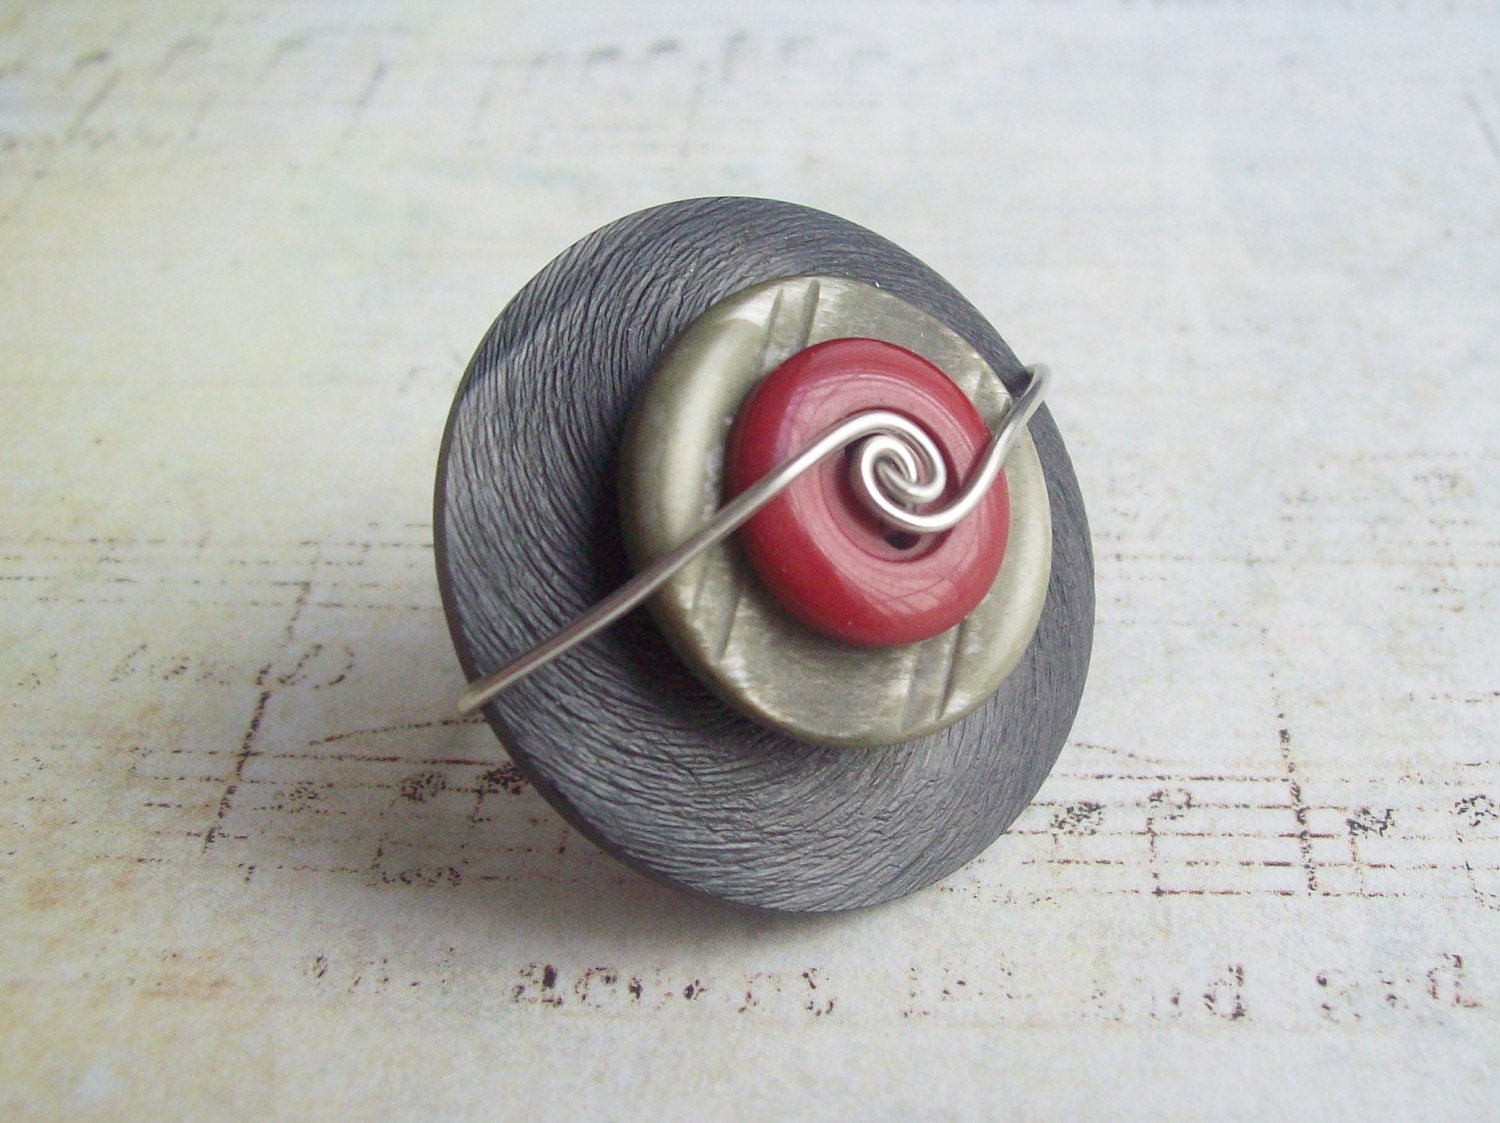 Vintage Button Ring in Black, Grey & Red - DixiesNightOwl